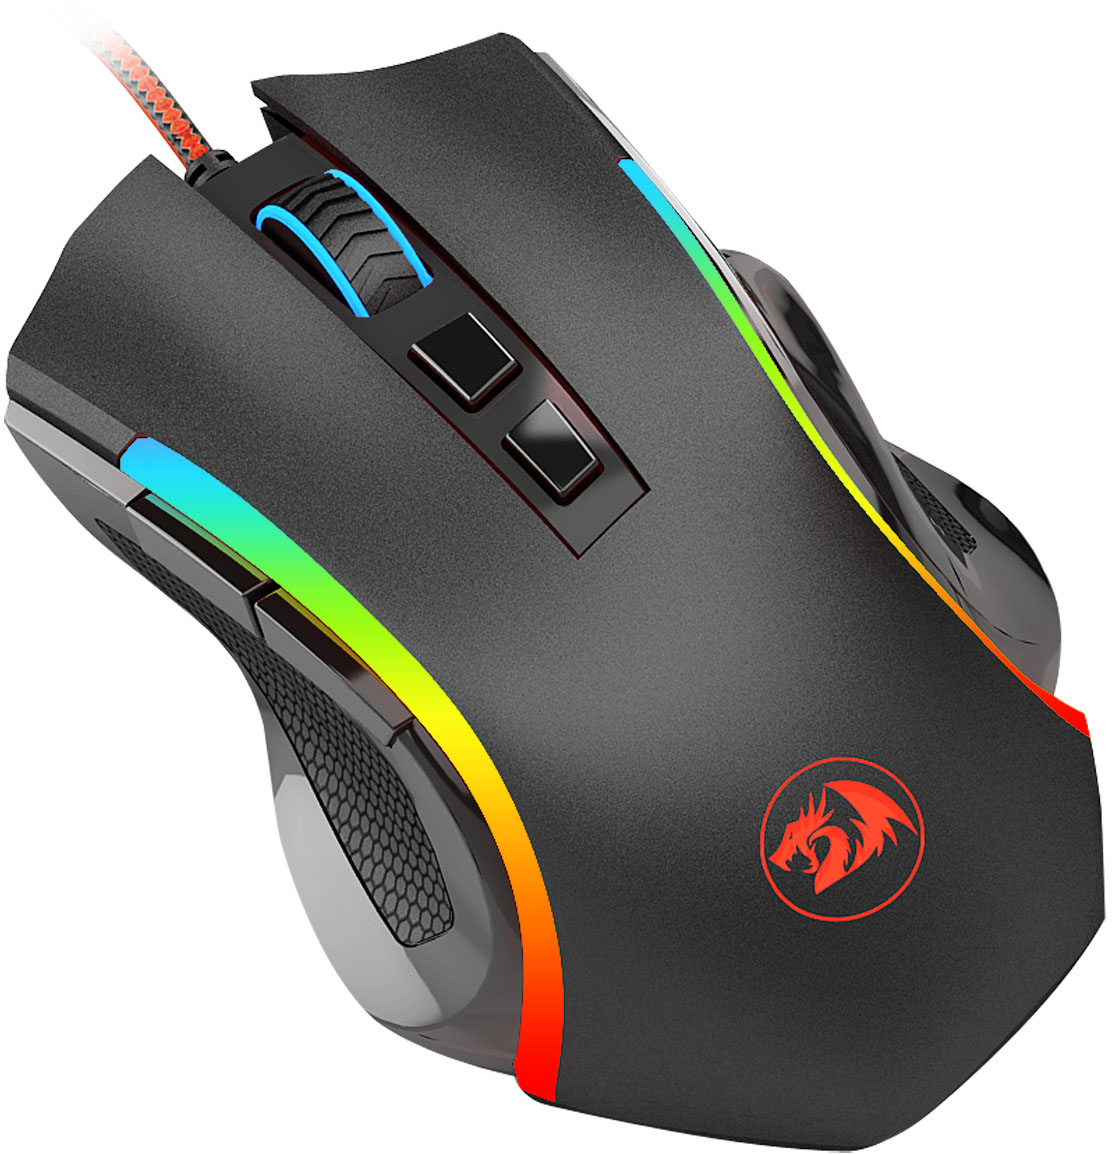 Angle View: REDRAGON - Griffin M607 Wired Optical Gaming Mouse - Black